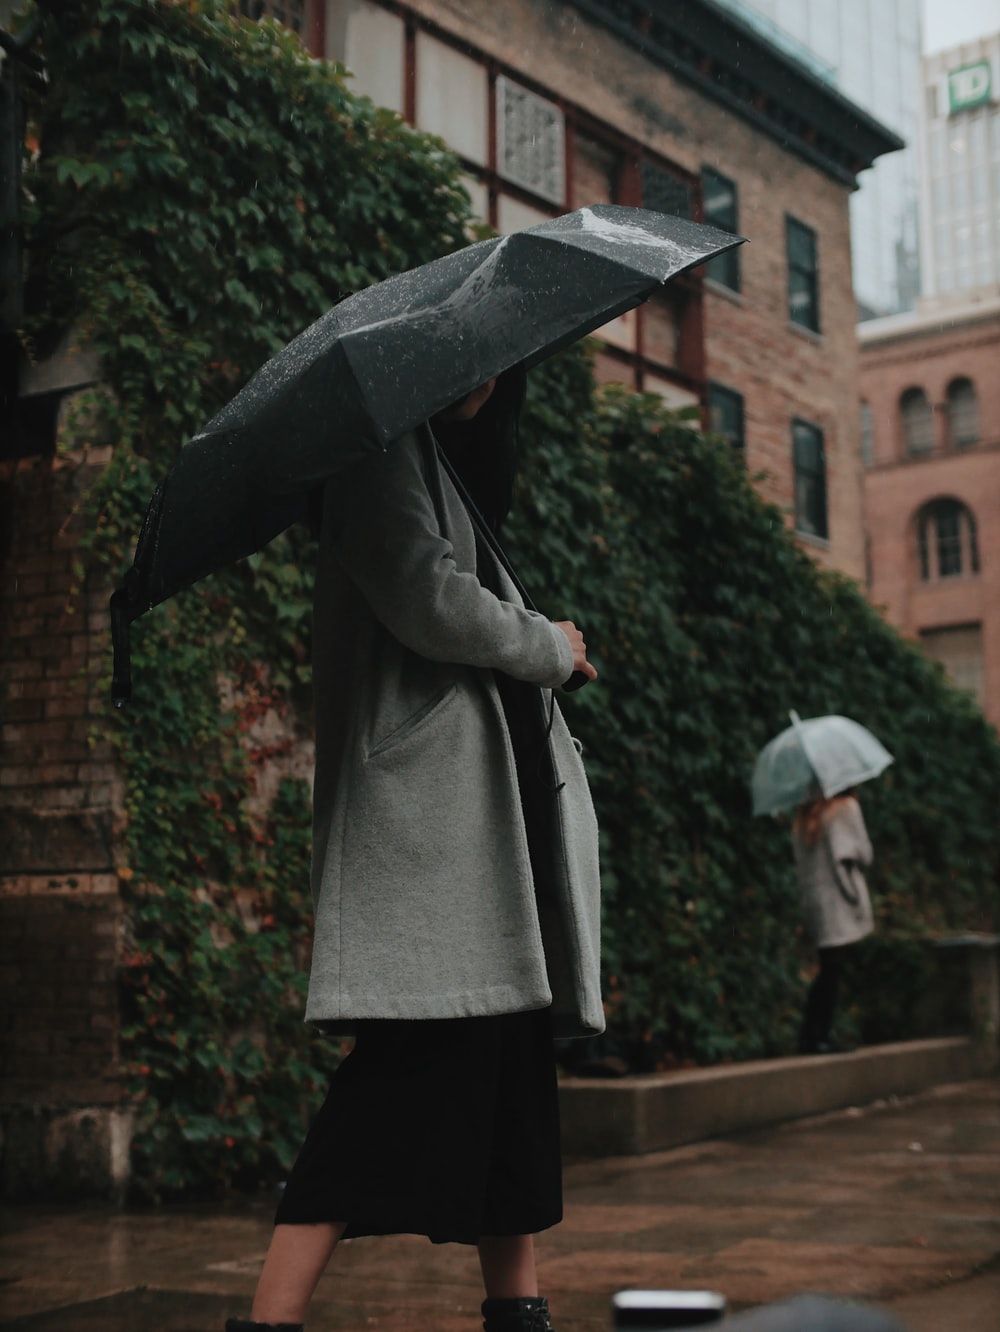 Woman Rain Picture. Download Free Image